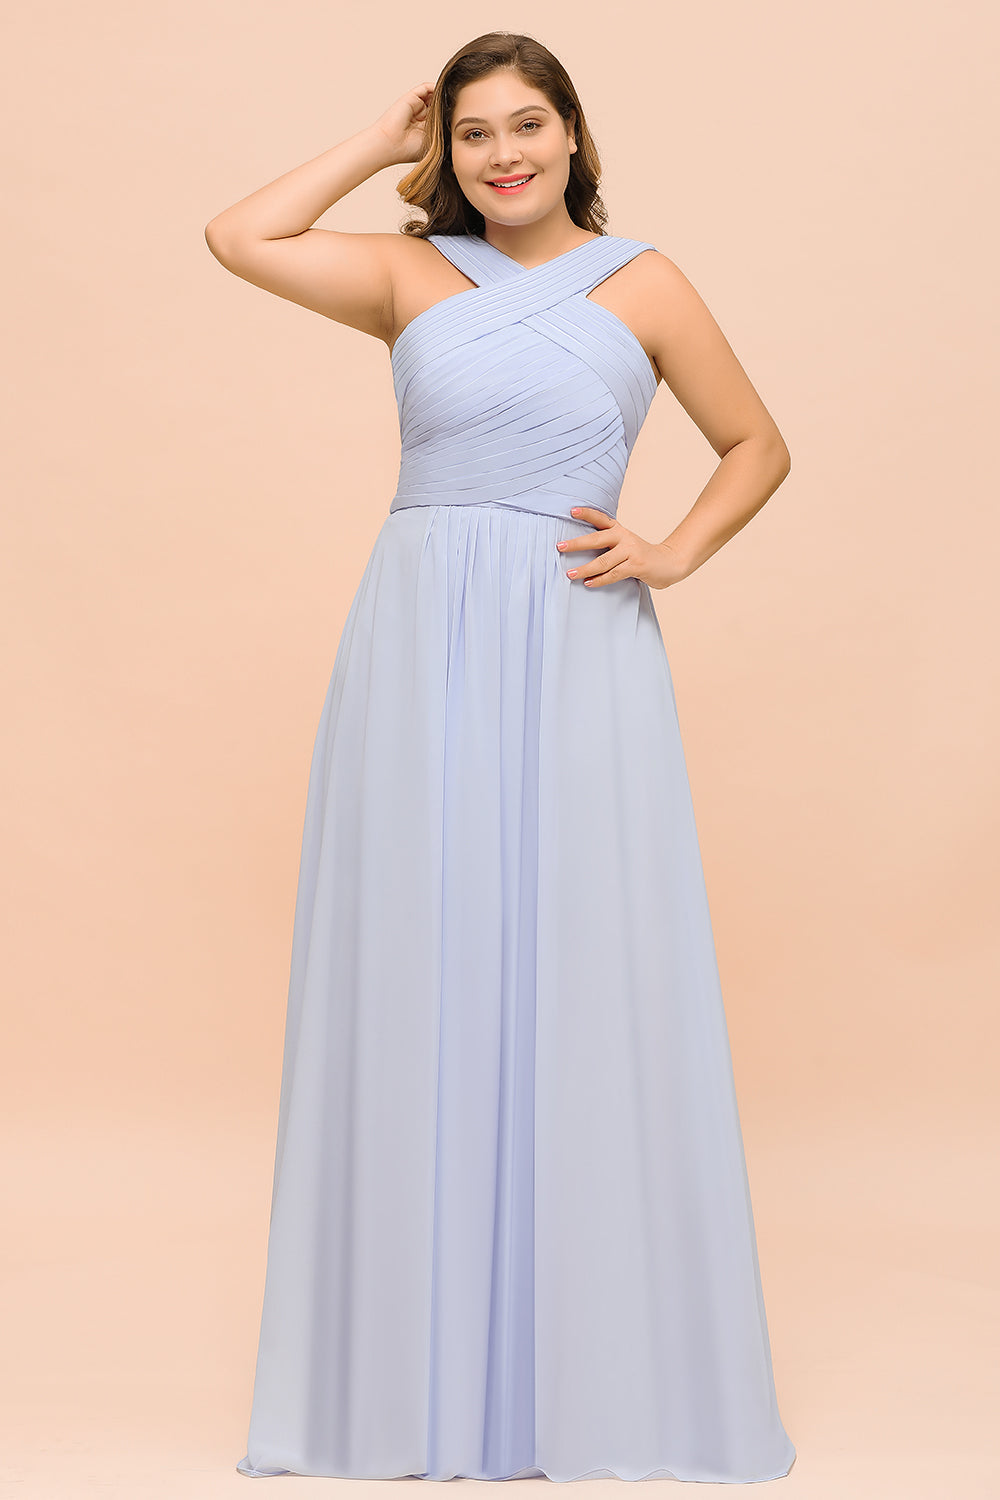 Plus Size Affordable Lavender Chiffon Bridesmaid Dresses with Ruffle-27dress